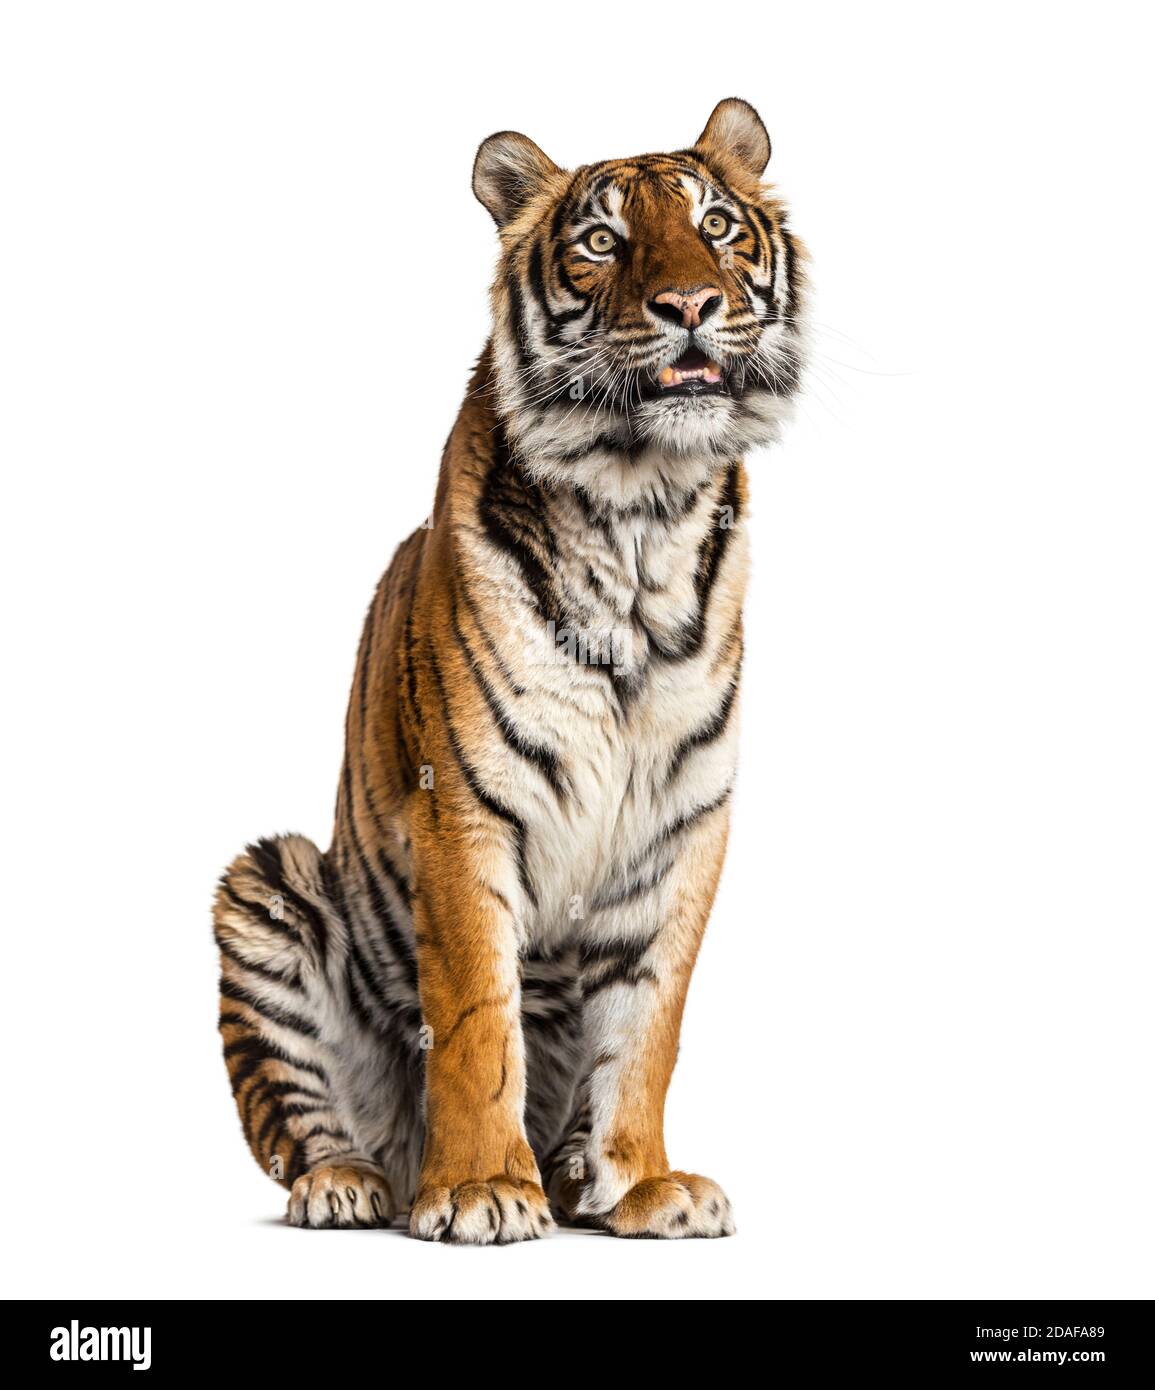 Tiger sitting, isolated on white Stock Photo